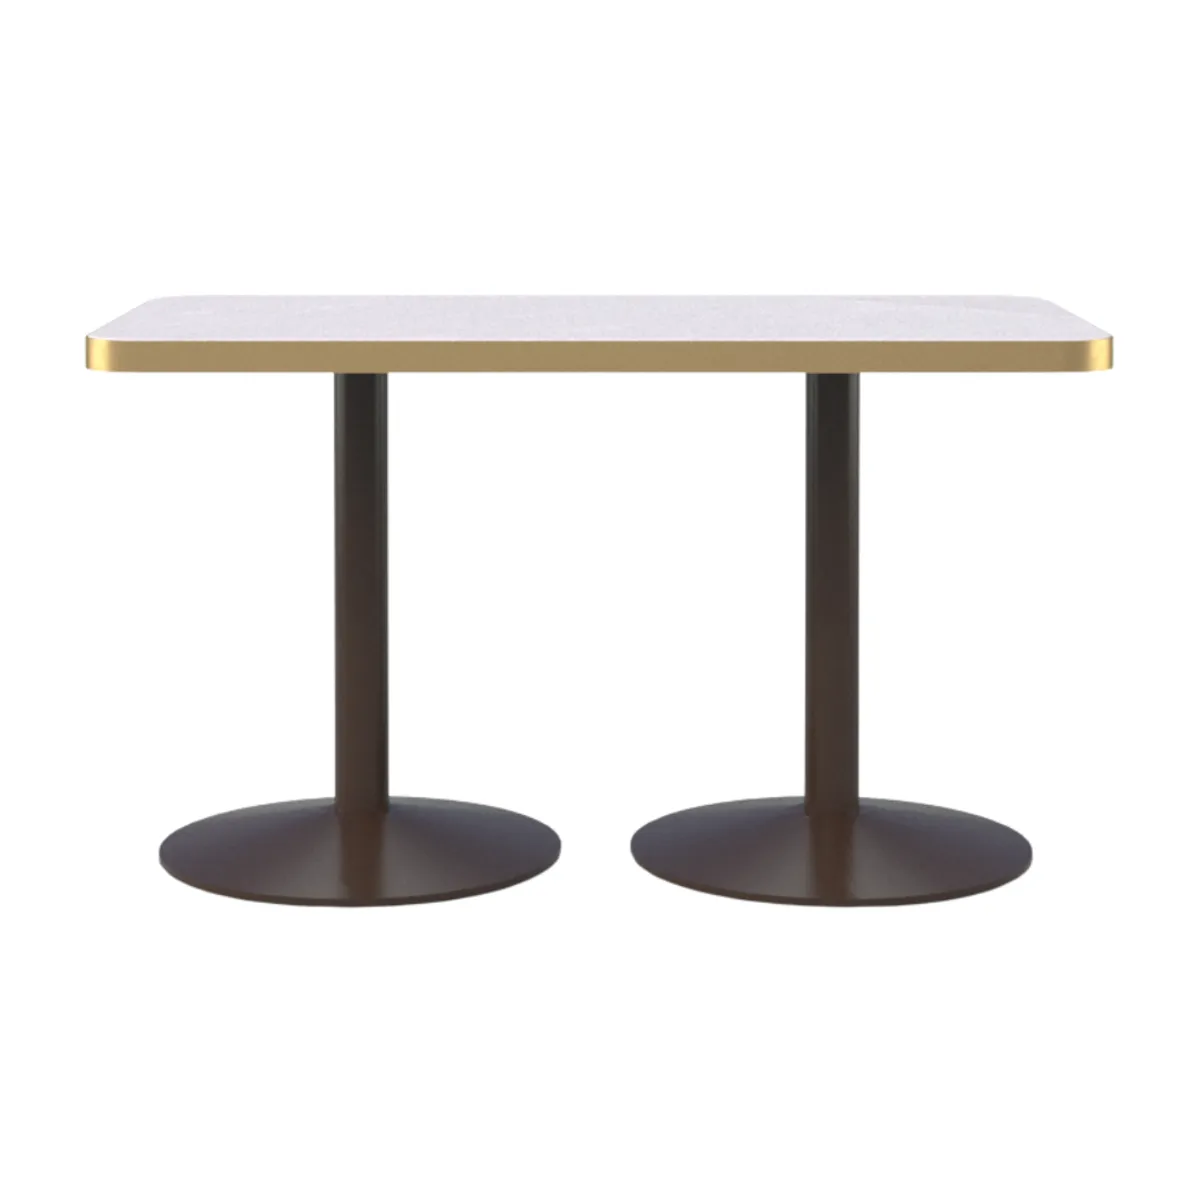 Gouqi rectangle dining table 2